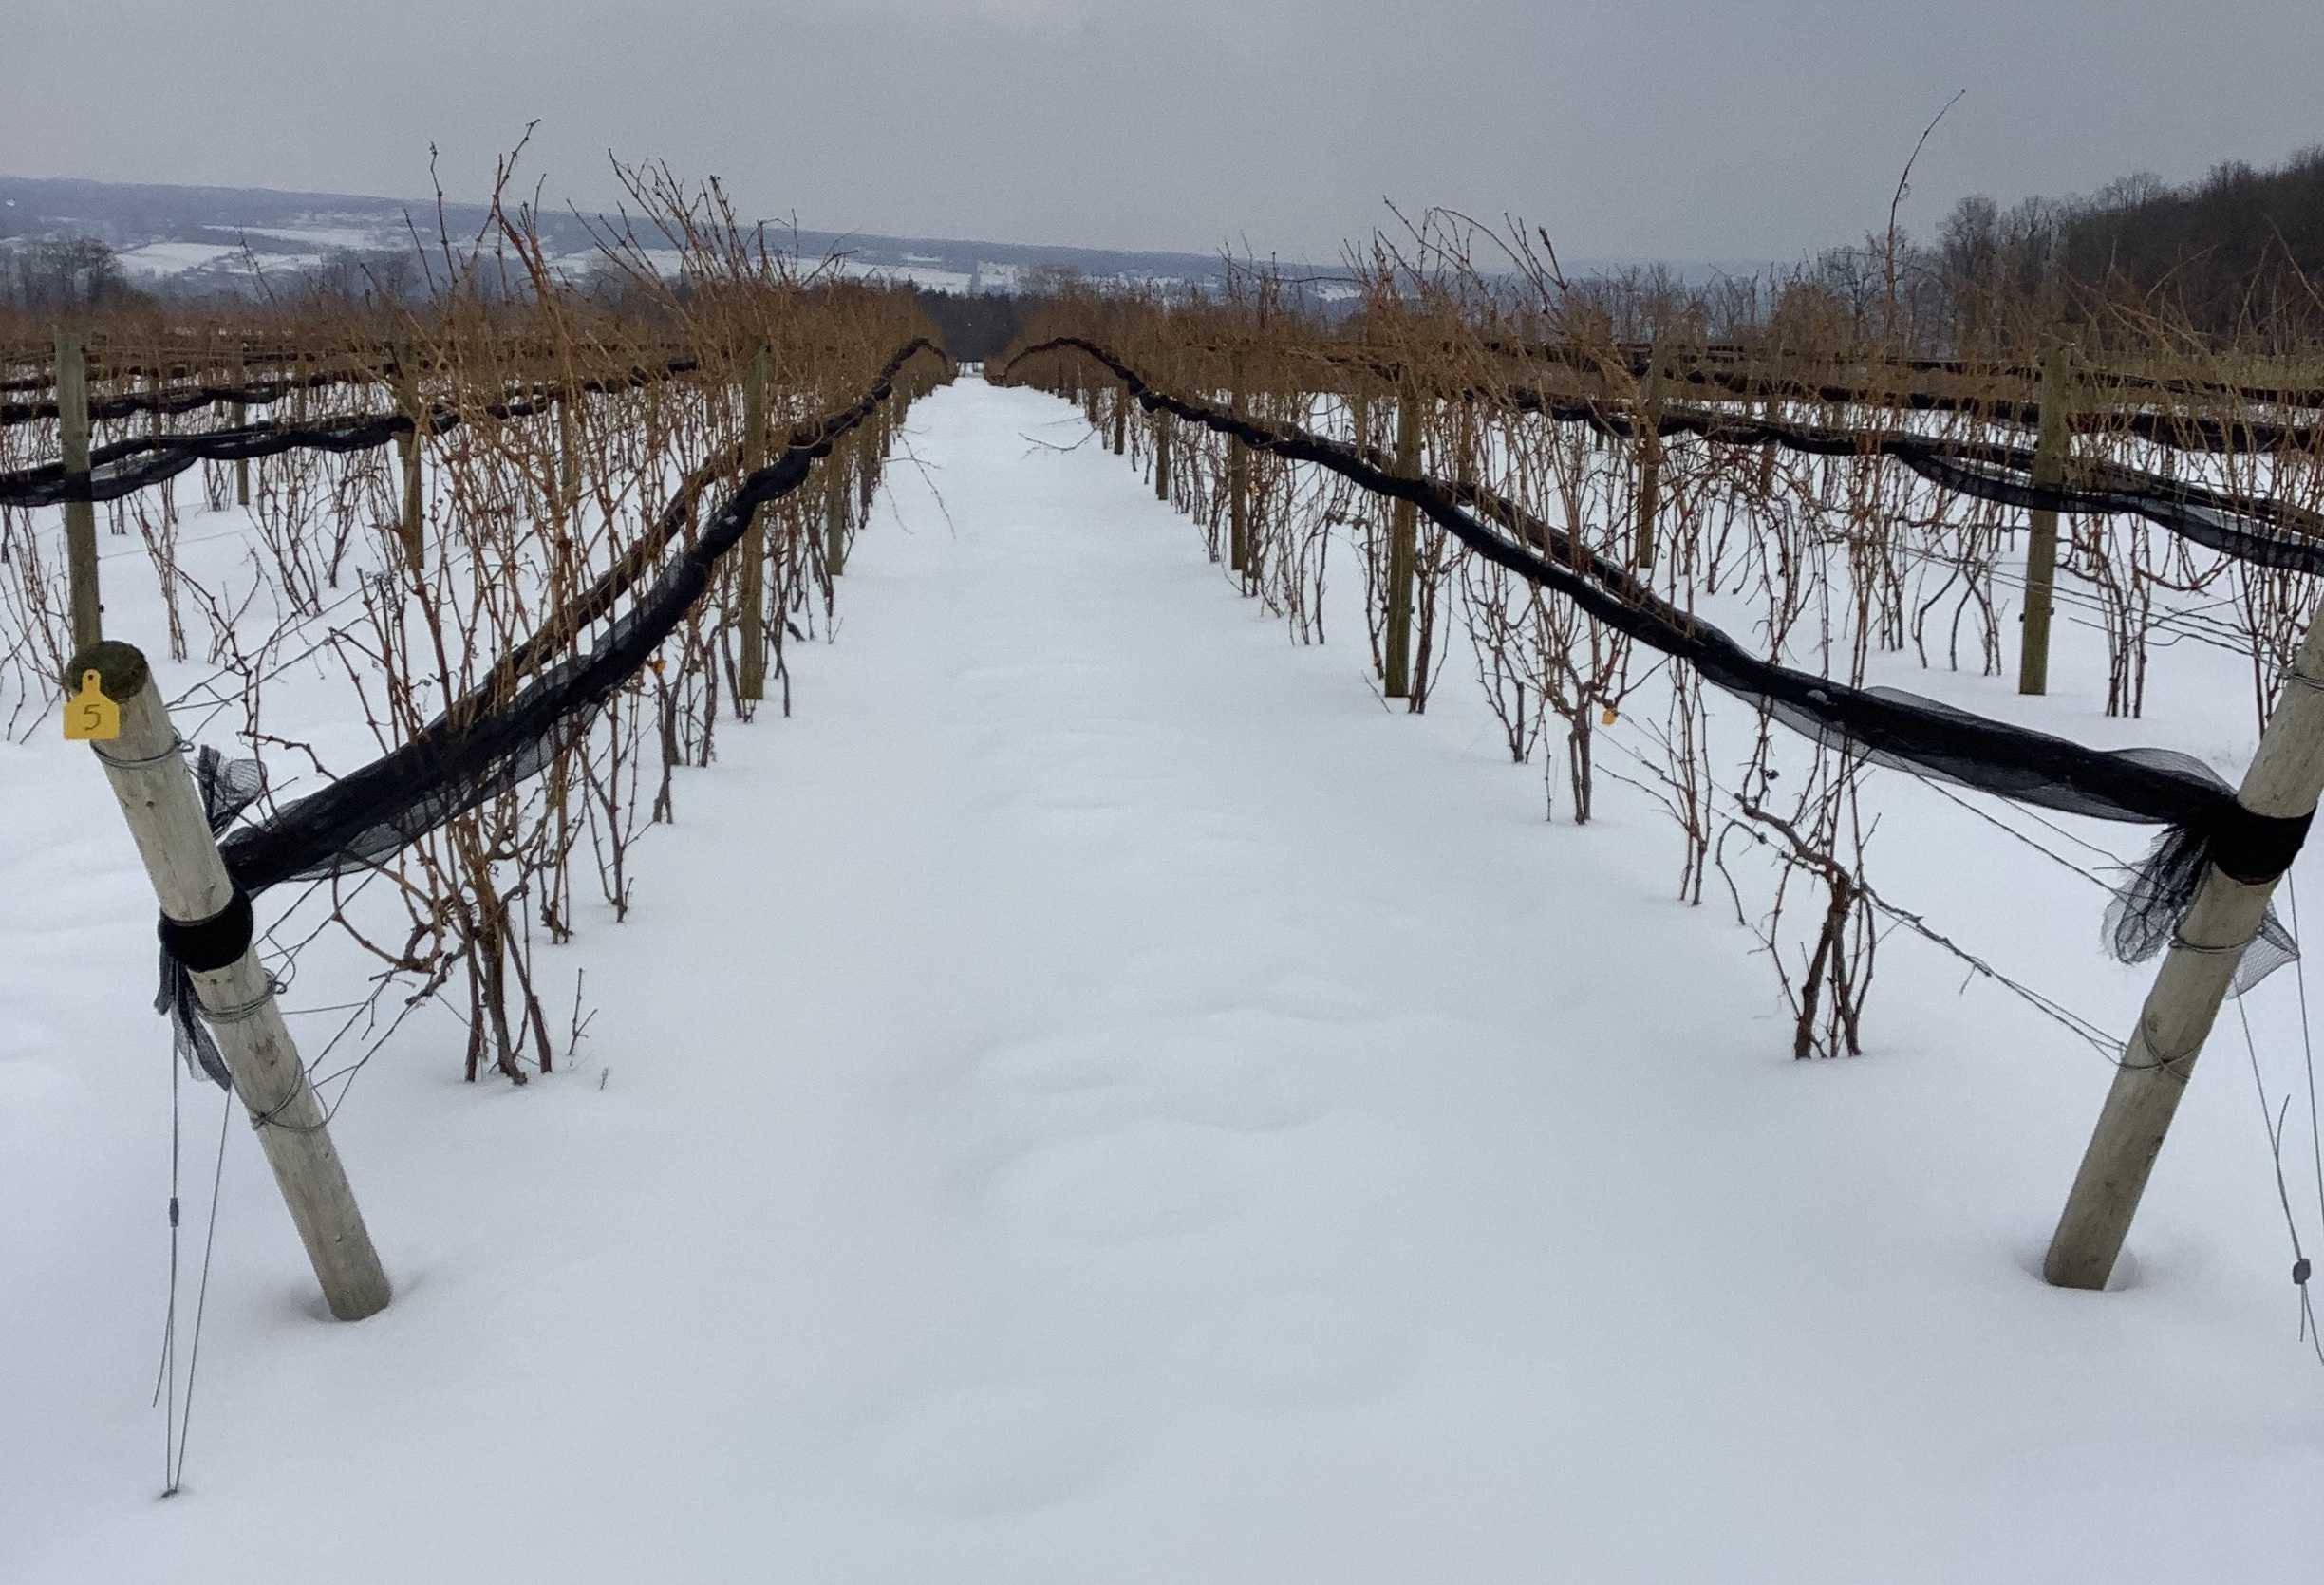 Two rows of wooden posts with wires that stretch between them. Grape vines are growing along these wires.